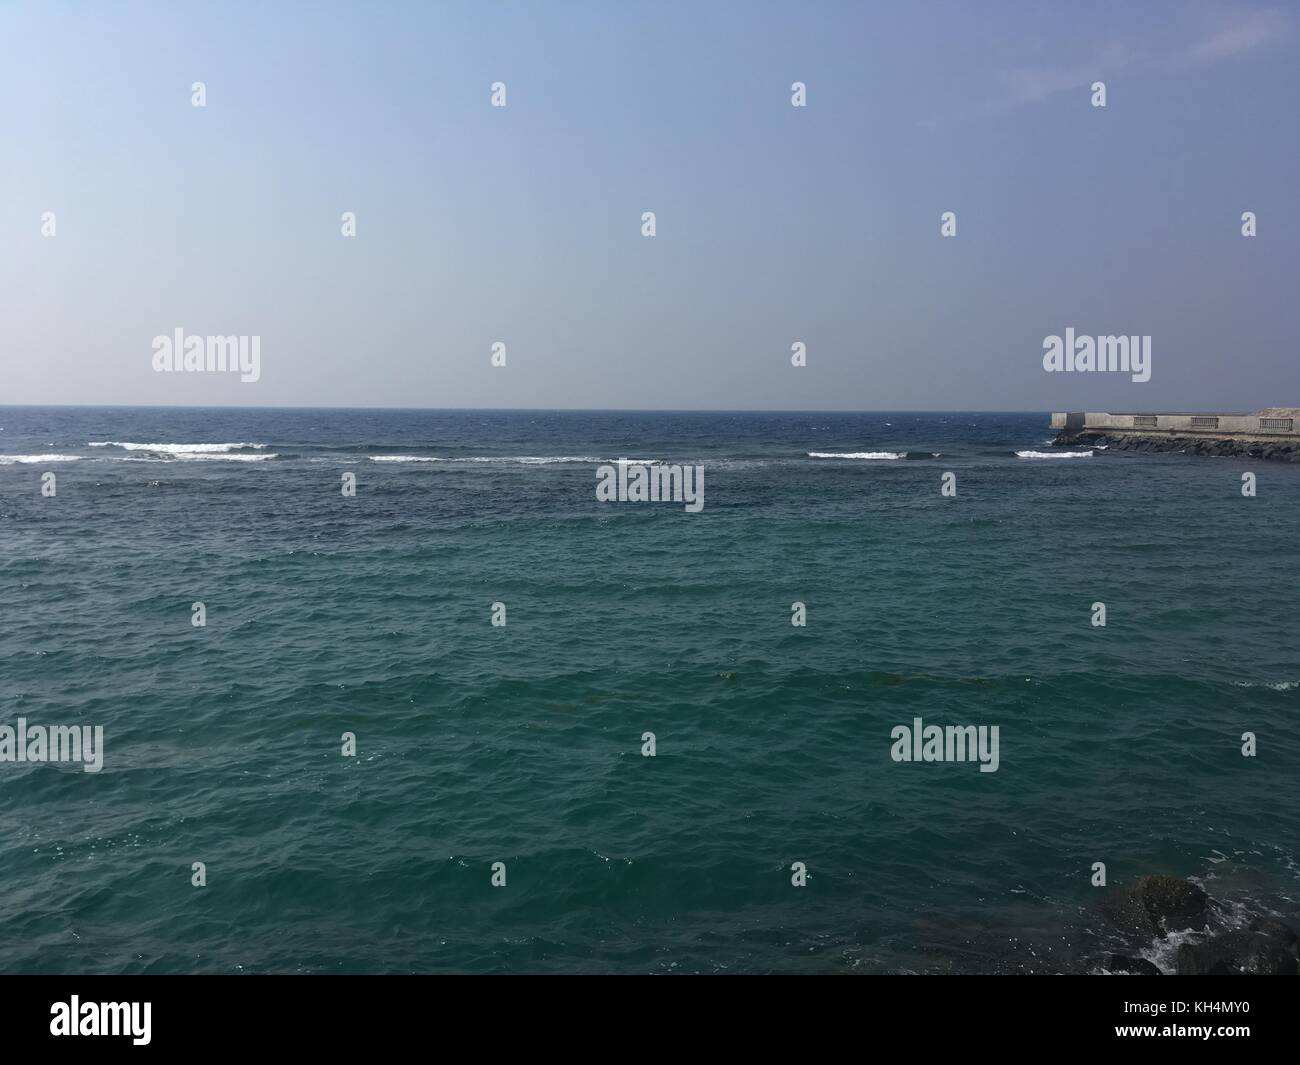 different images for the redsea in jeddah Stock Photo